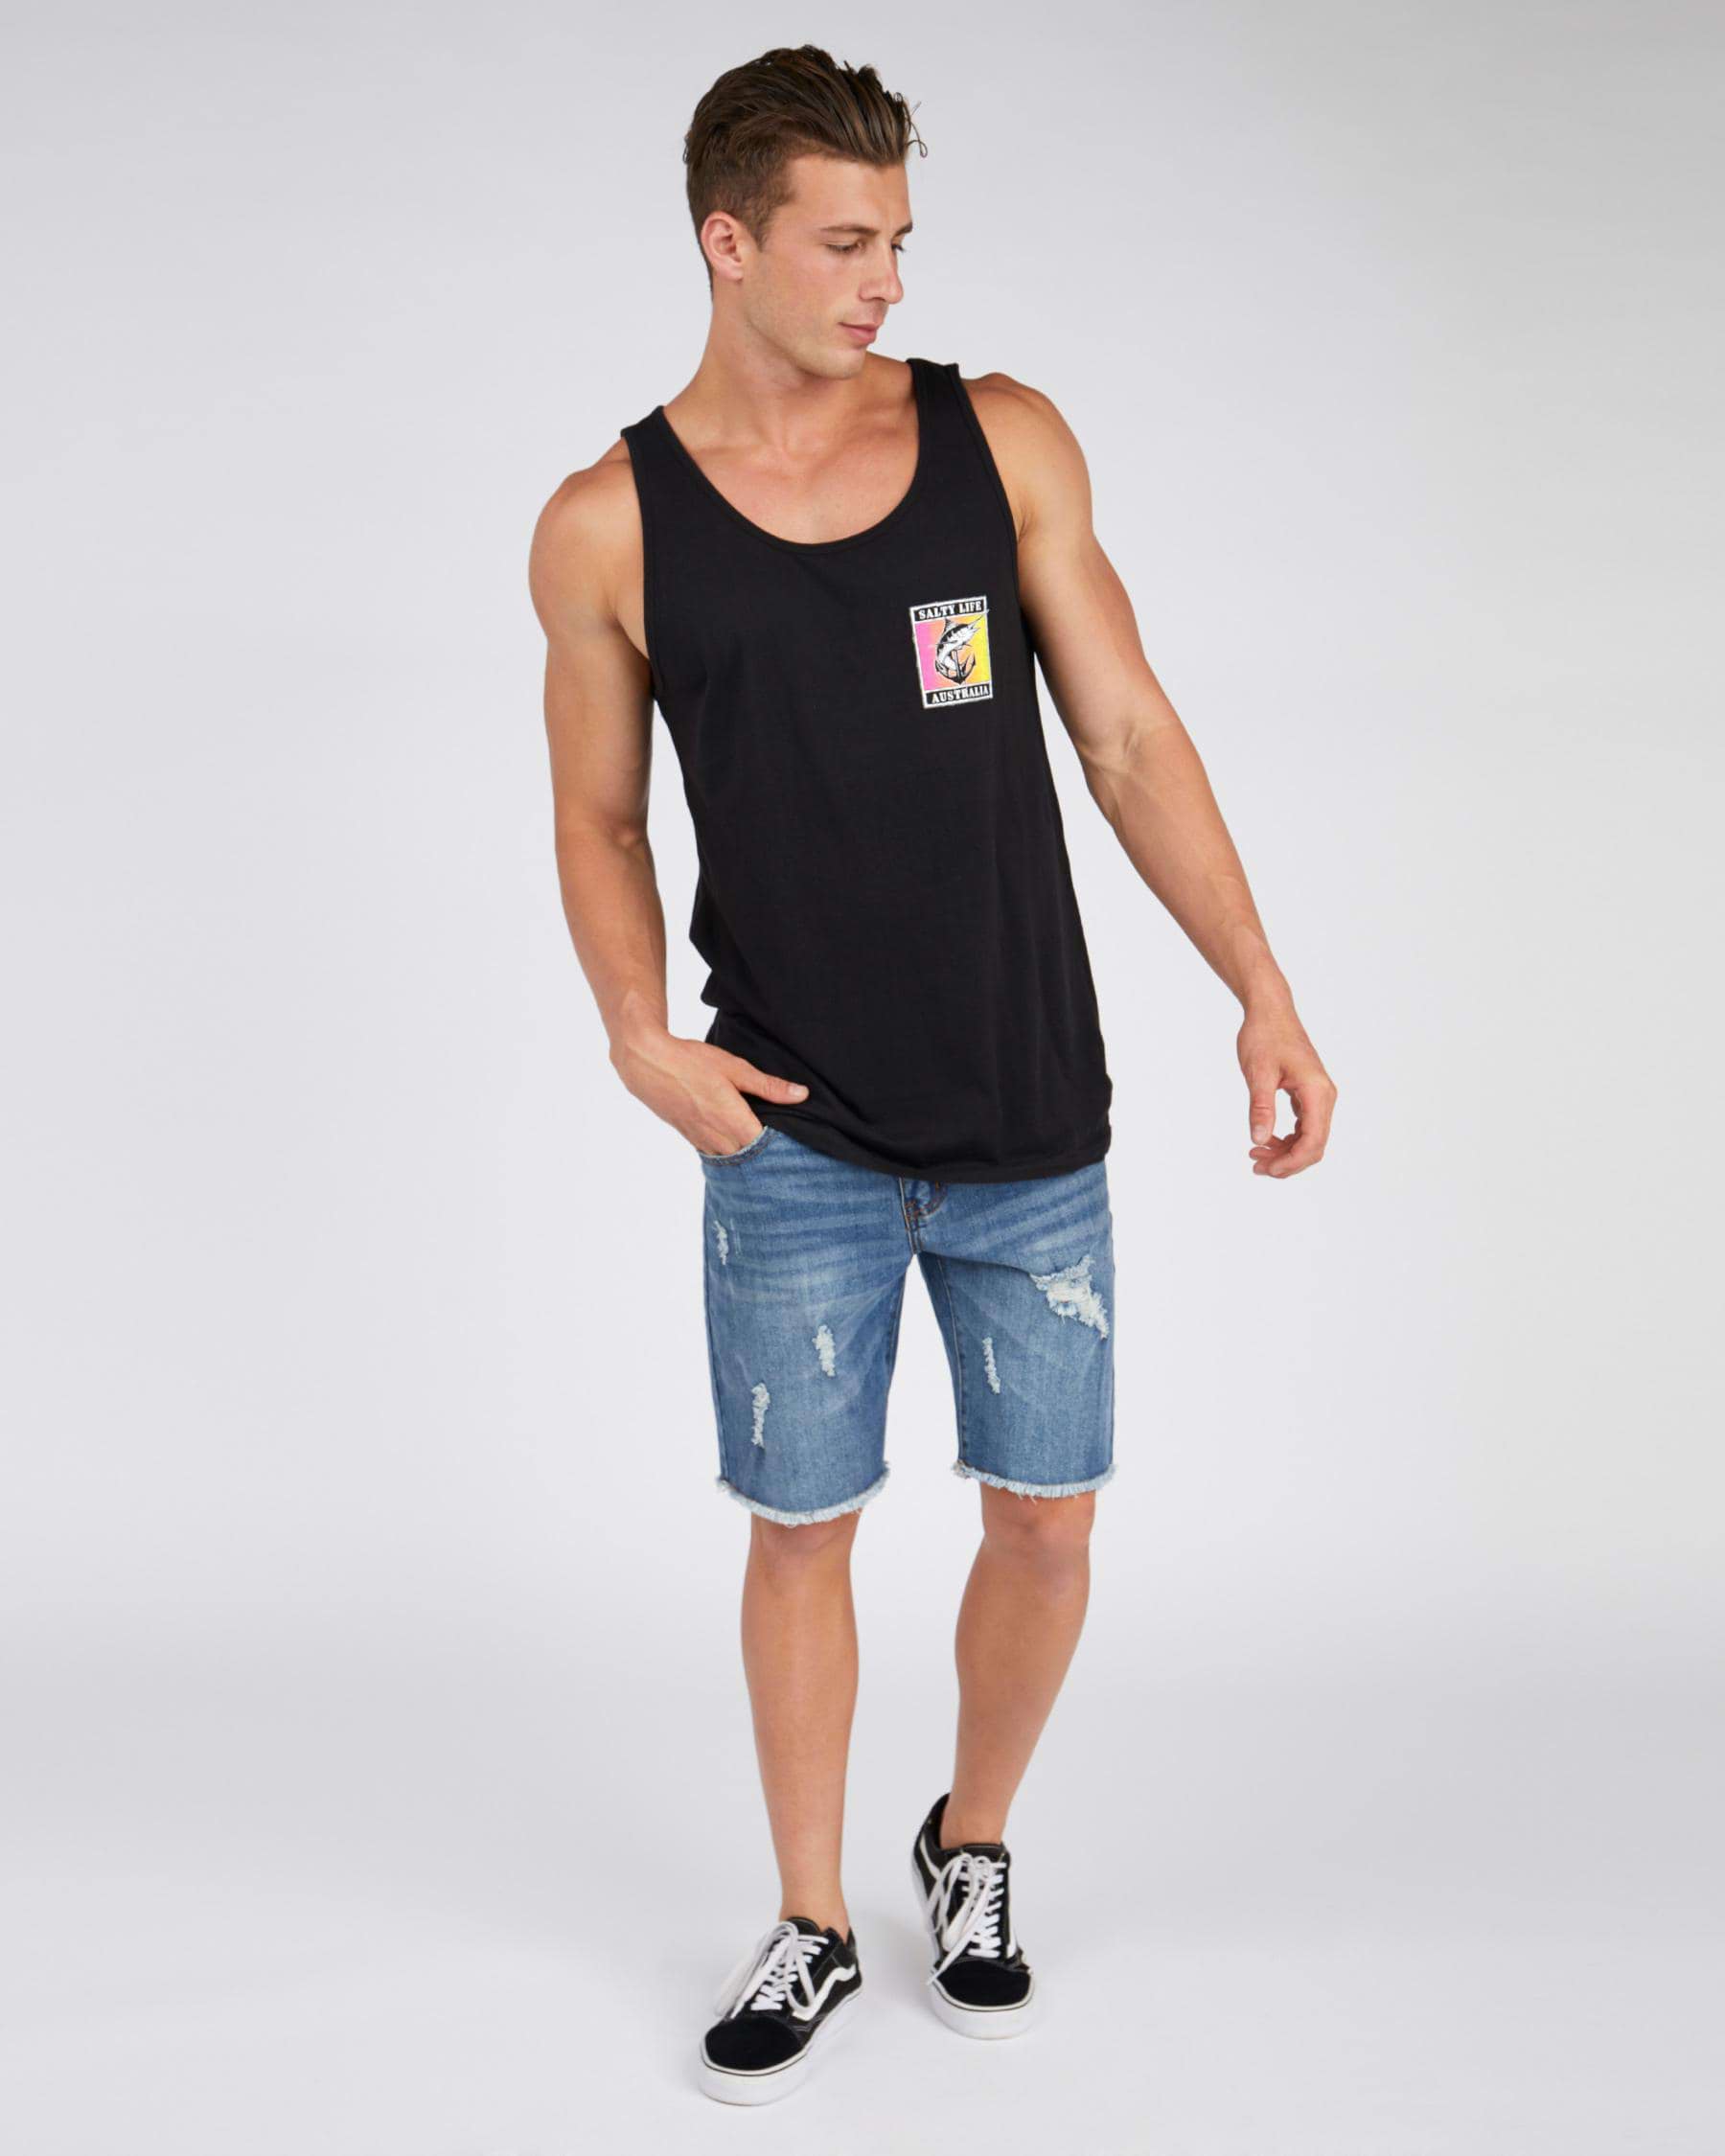 Salty Life Mirage Singlet In Black - Fast Shipping & Easy Returns ...